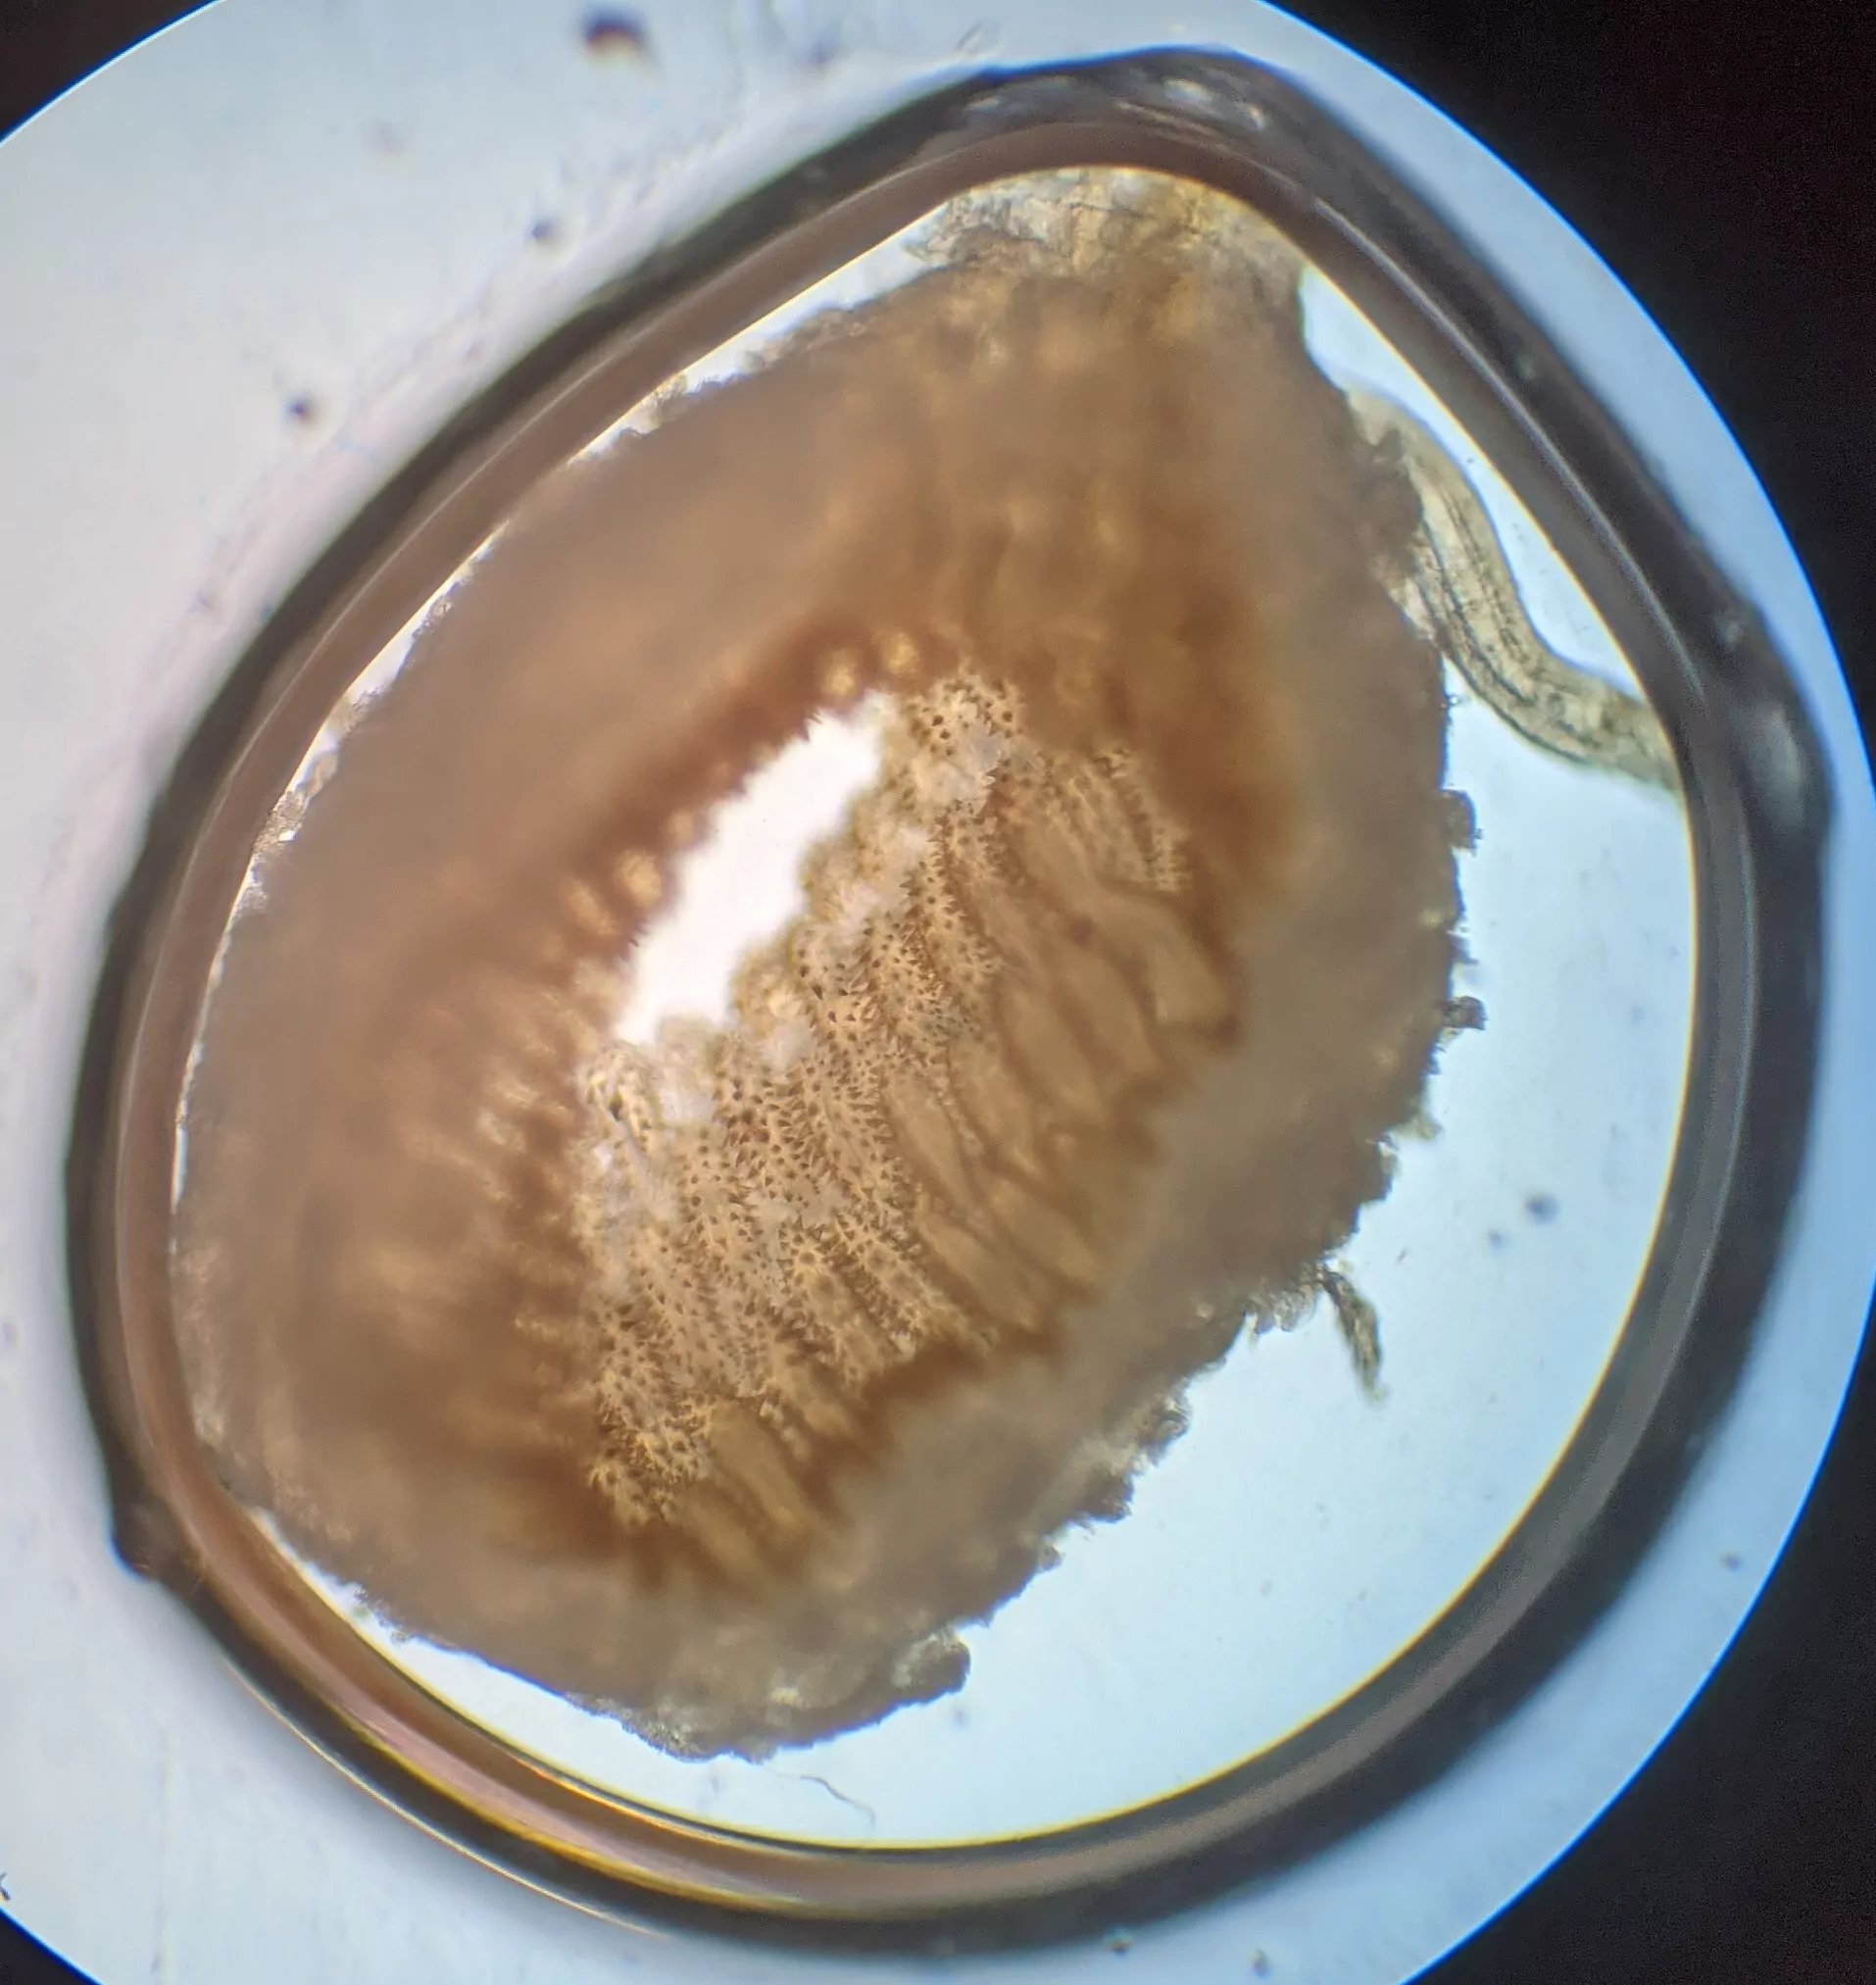 a cross section of the proventriculus of a wax moth larva